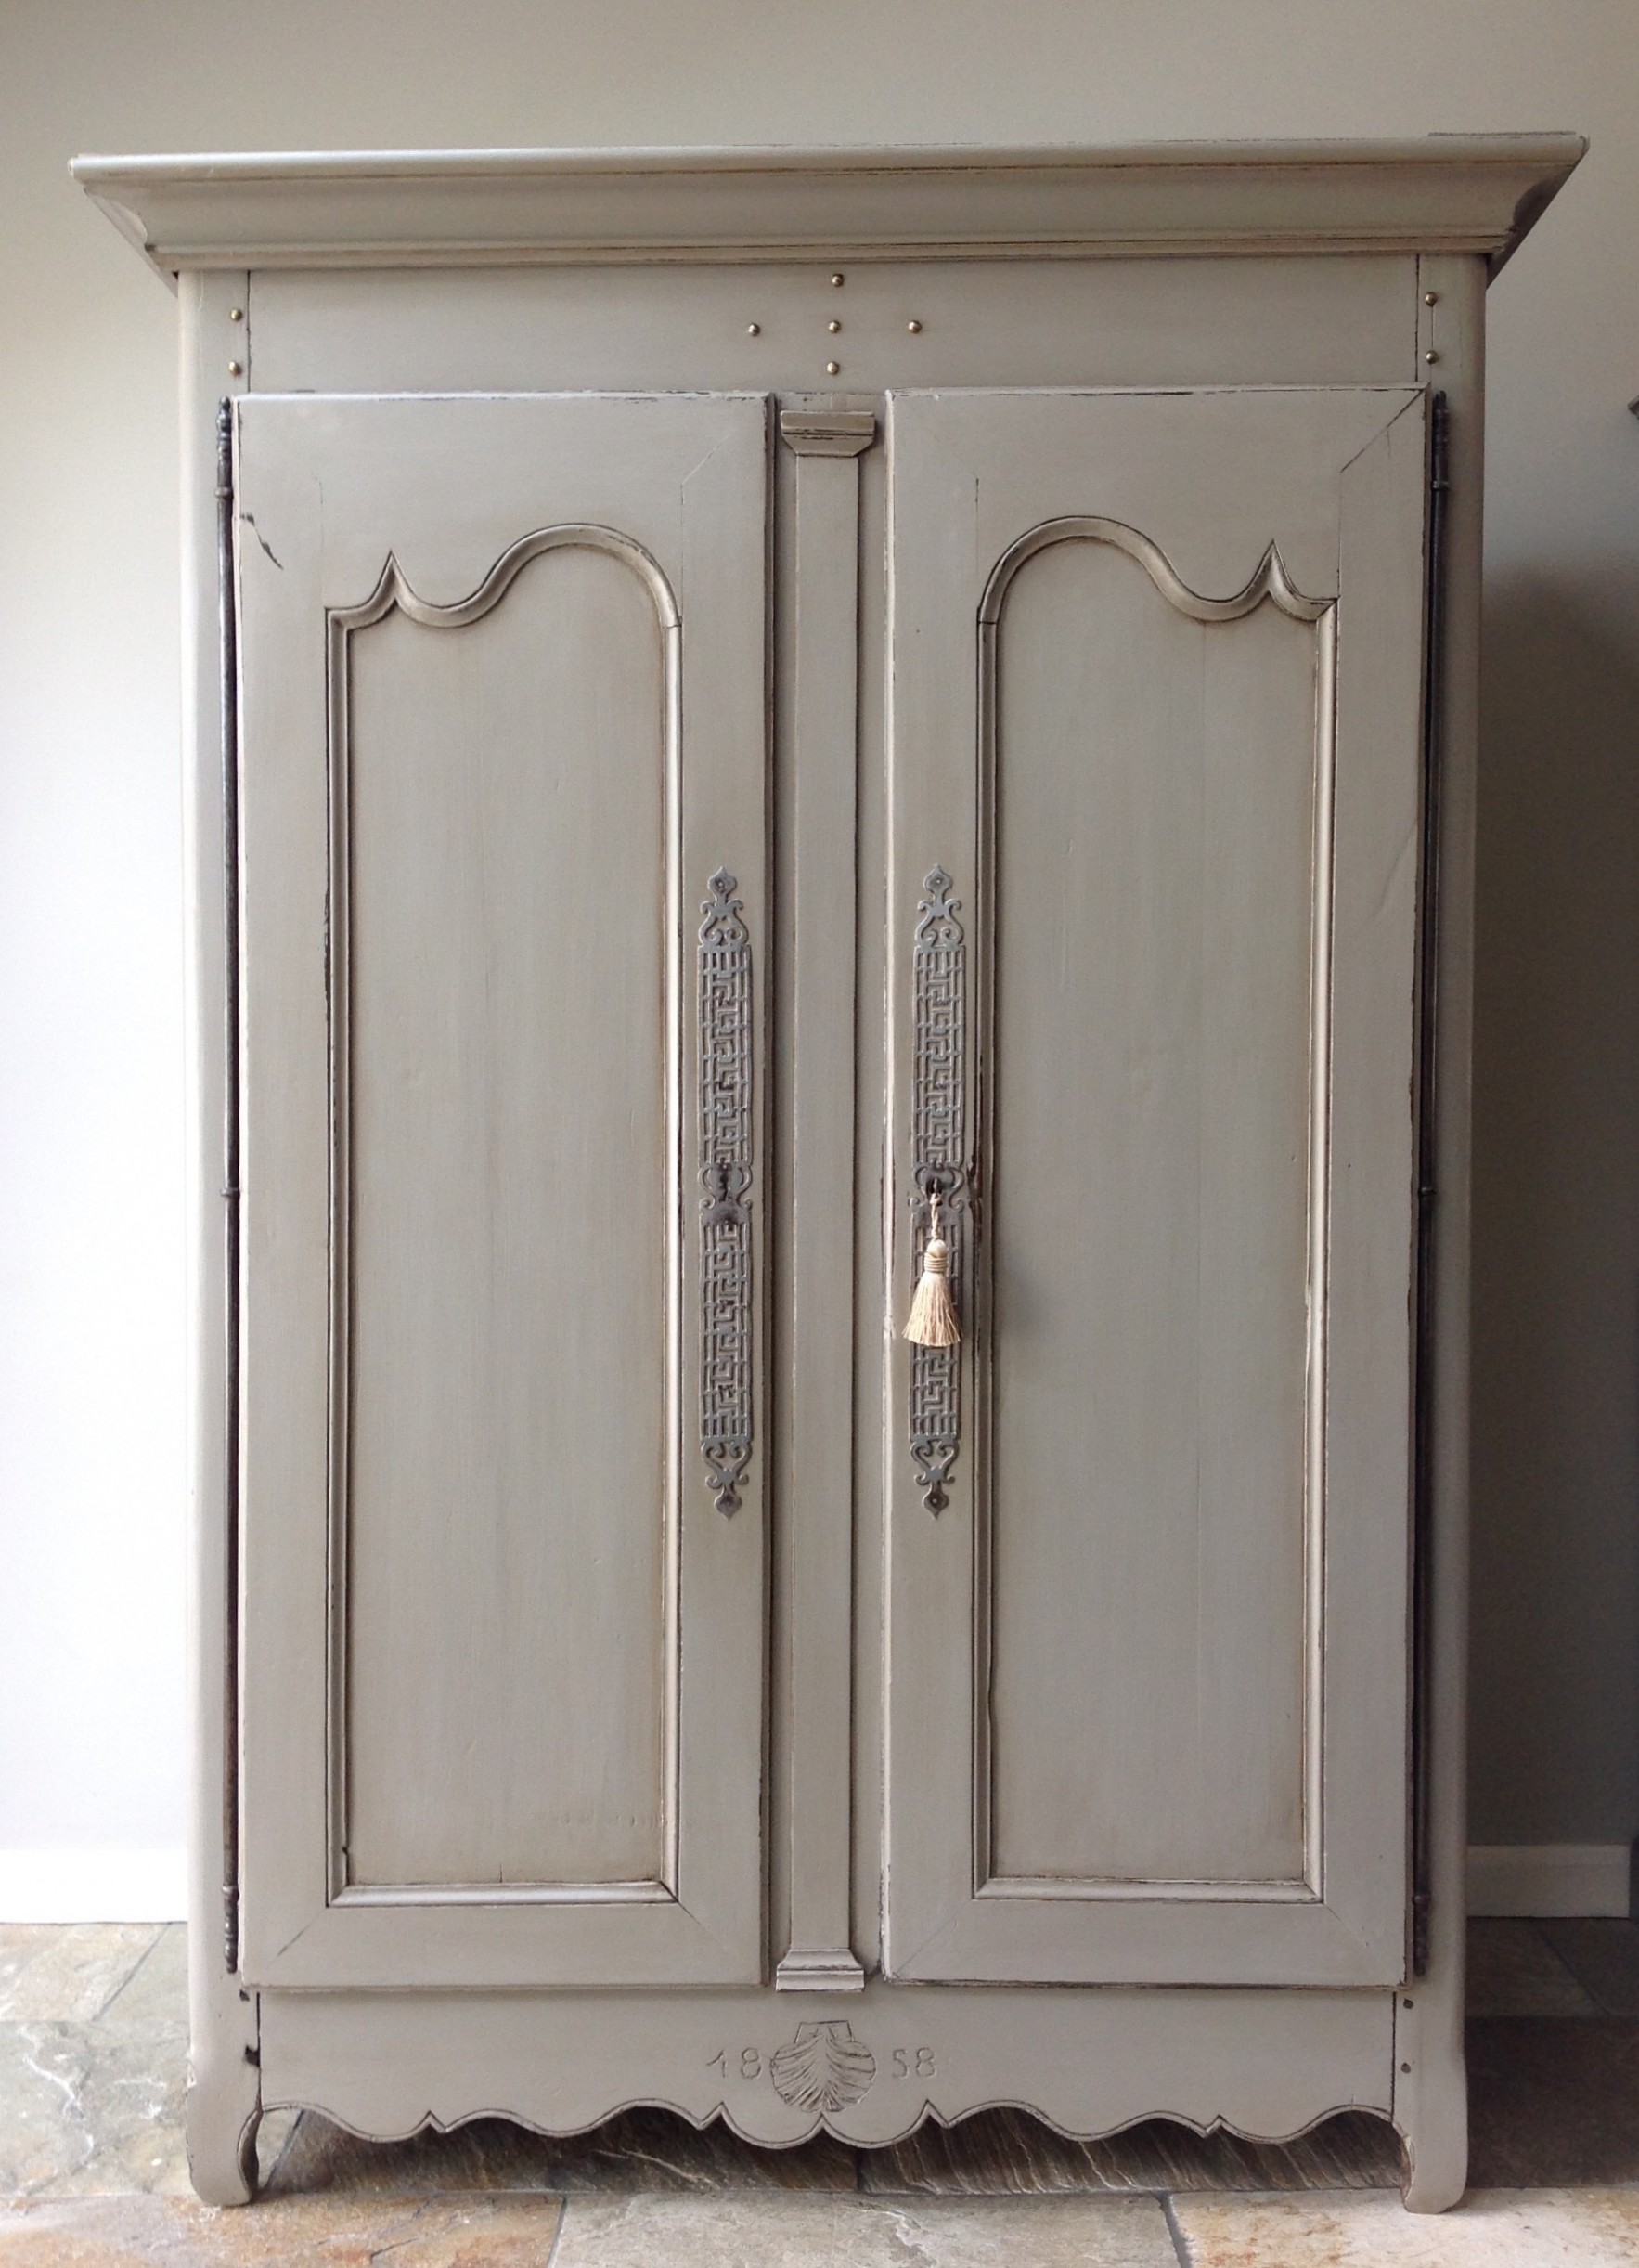 Antique French Grey Painted Housekeepers Armoire Wardrobe Linen Press Cupboard Annie Sloan French Linen Paint Similar To Annie Sloan French Linen